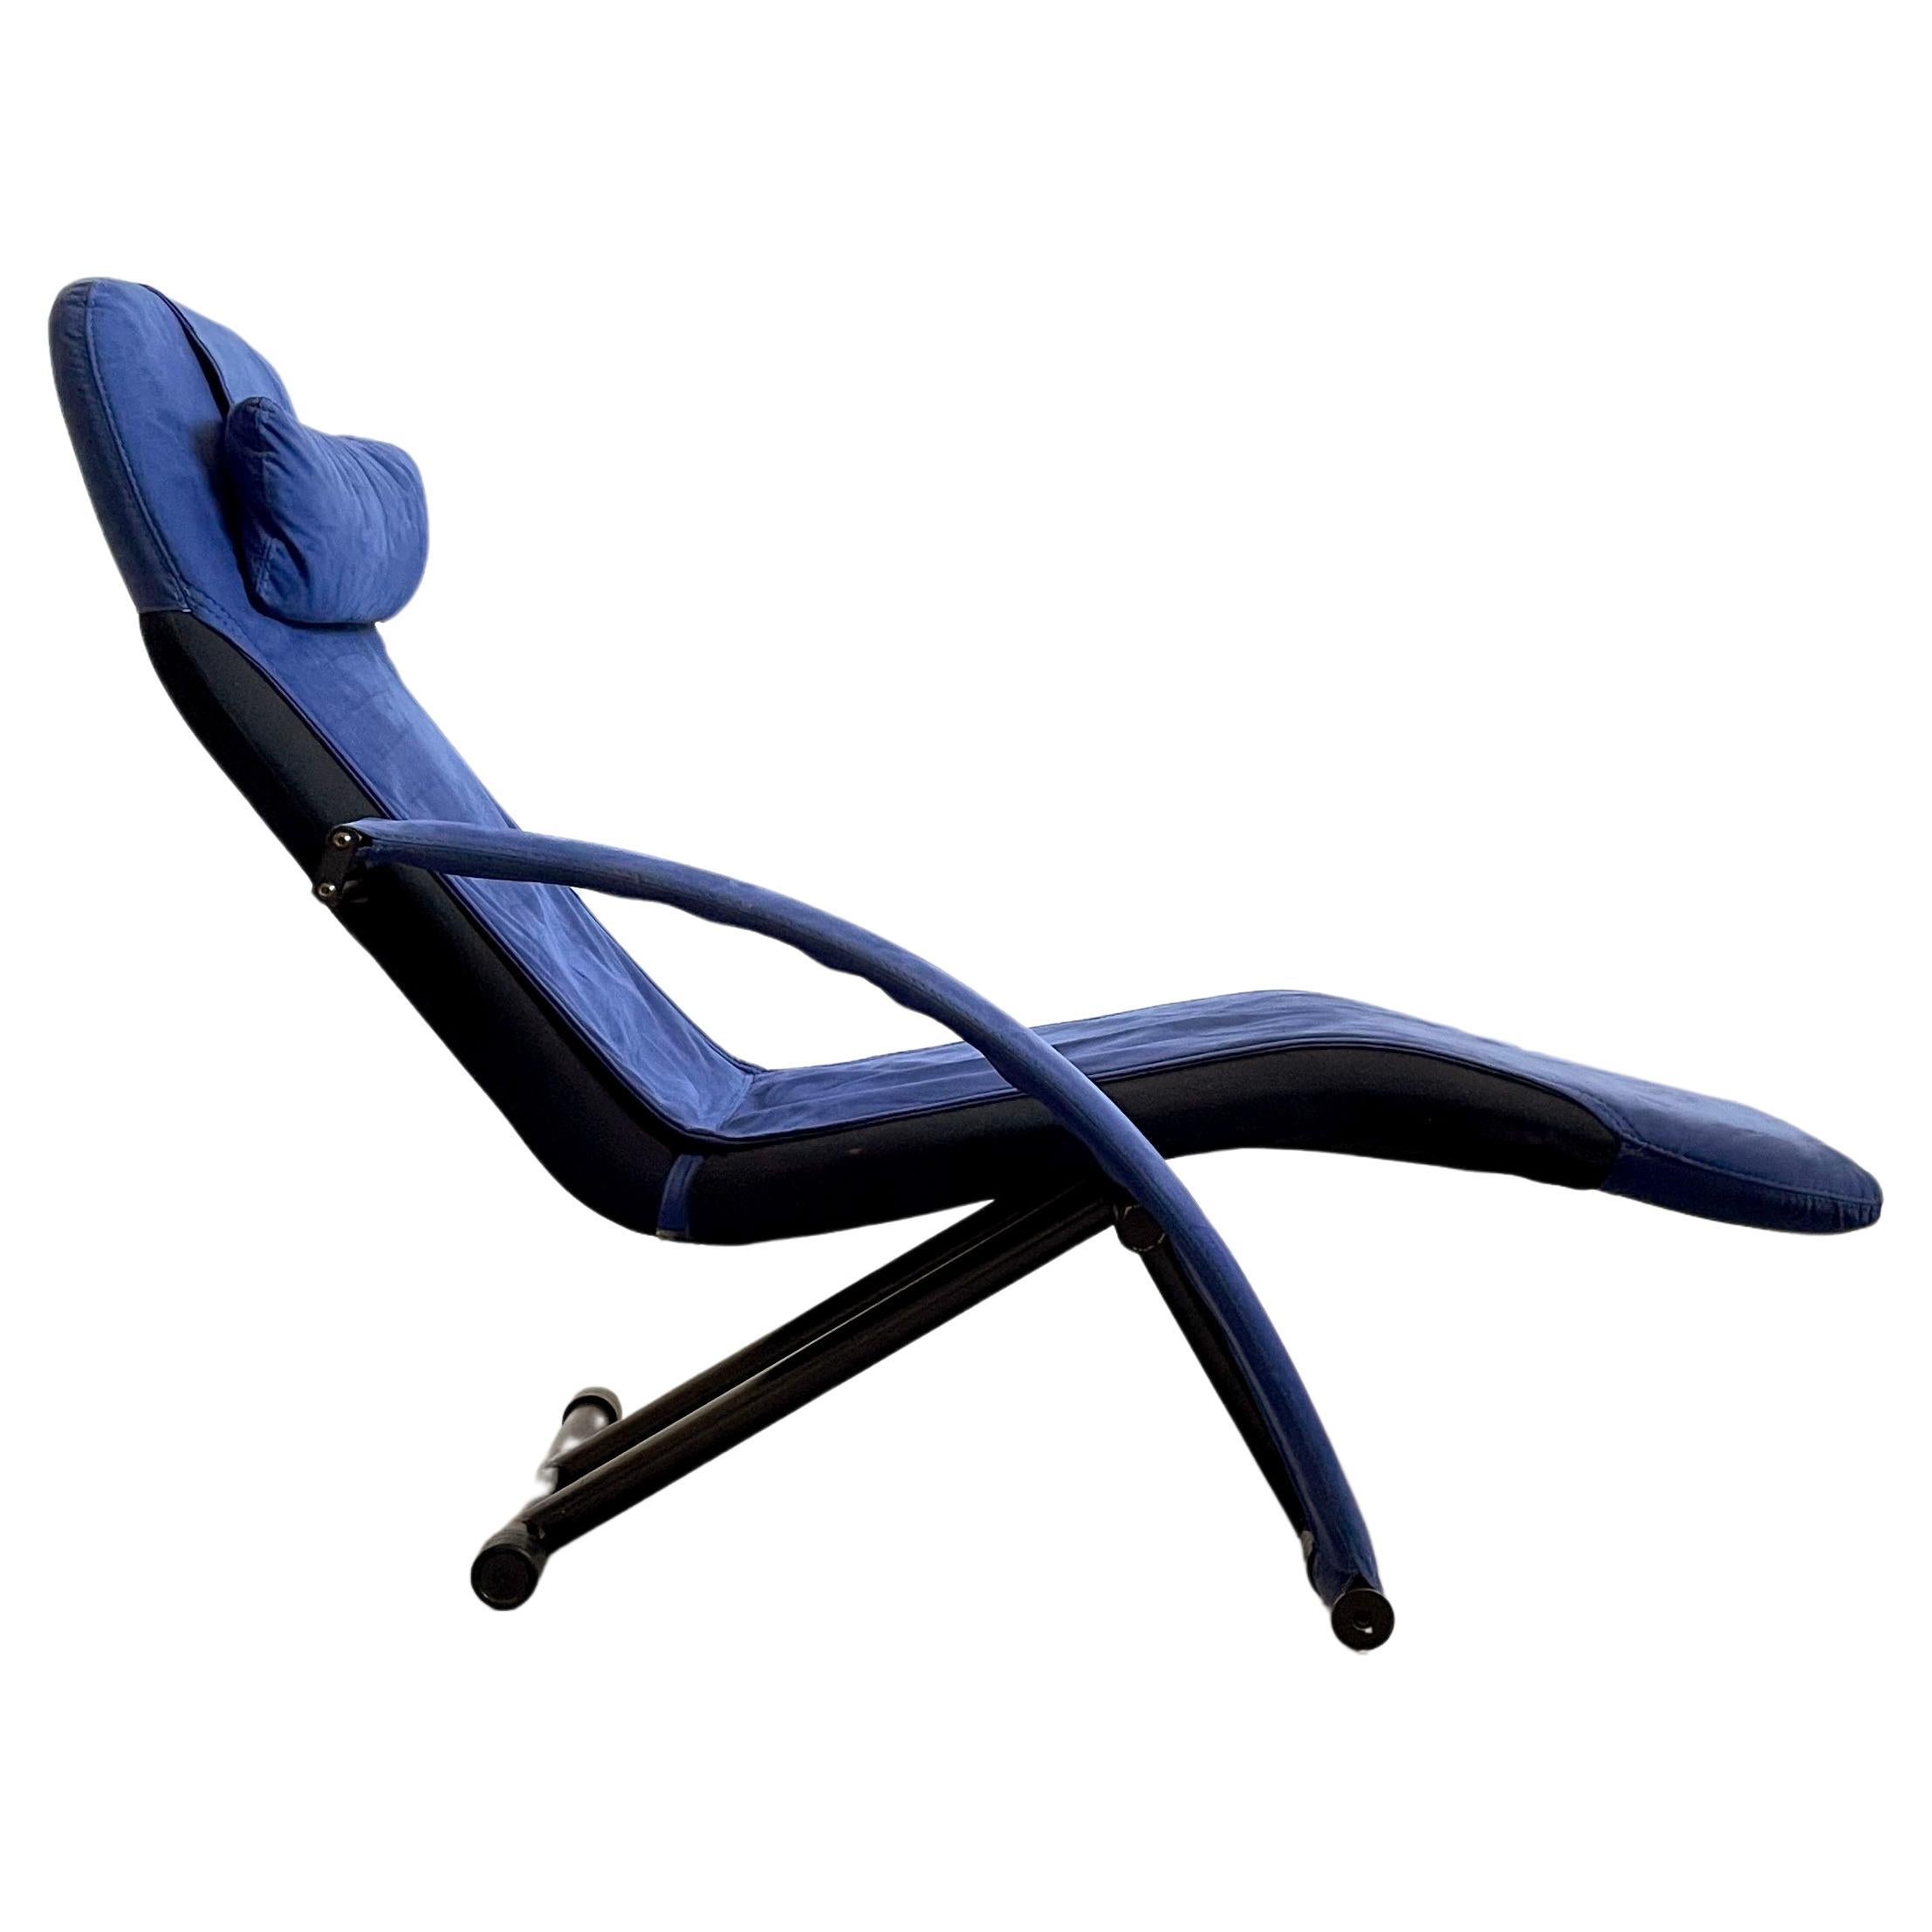 Flexa Lounge Chair by Adriano Piazzesi for Arketipo, 1987